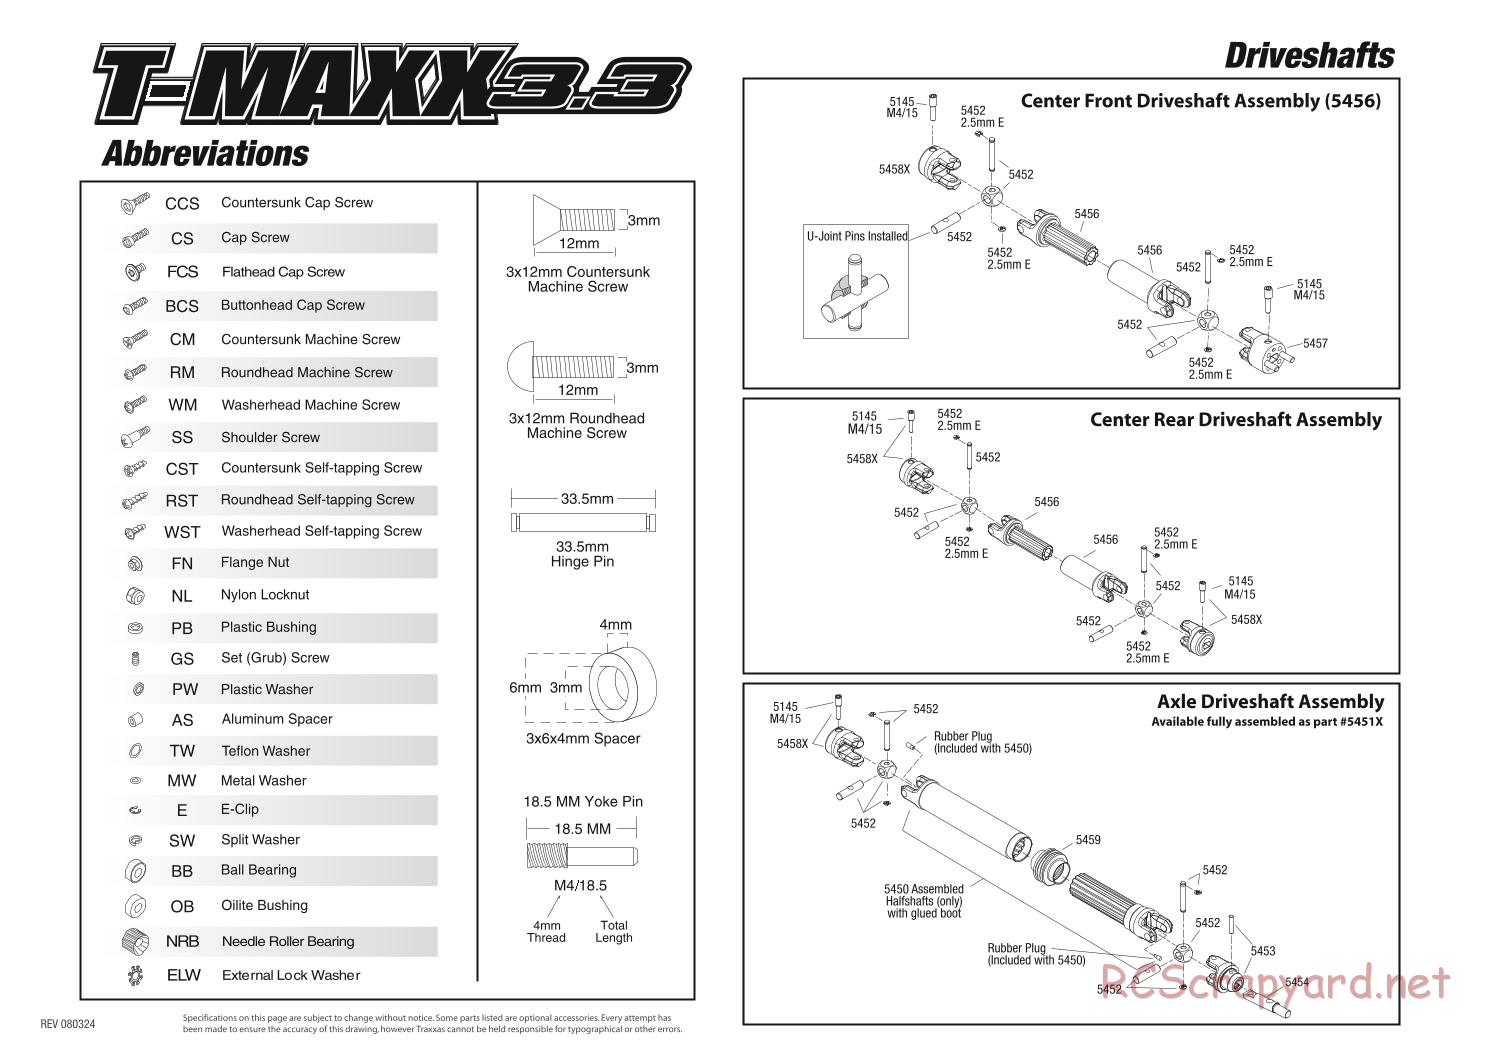 Traxxas - T-Maxx 3.3 (2008) - Exploded Views - Page 4